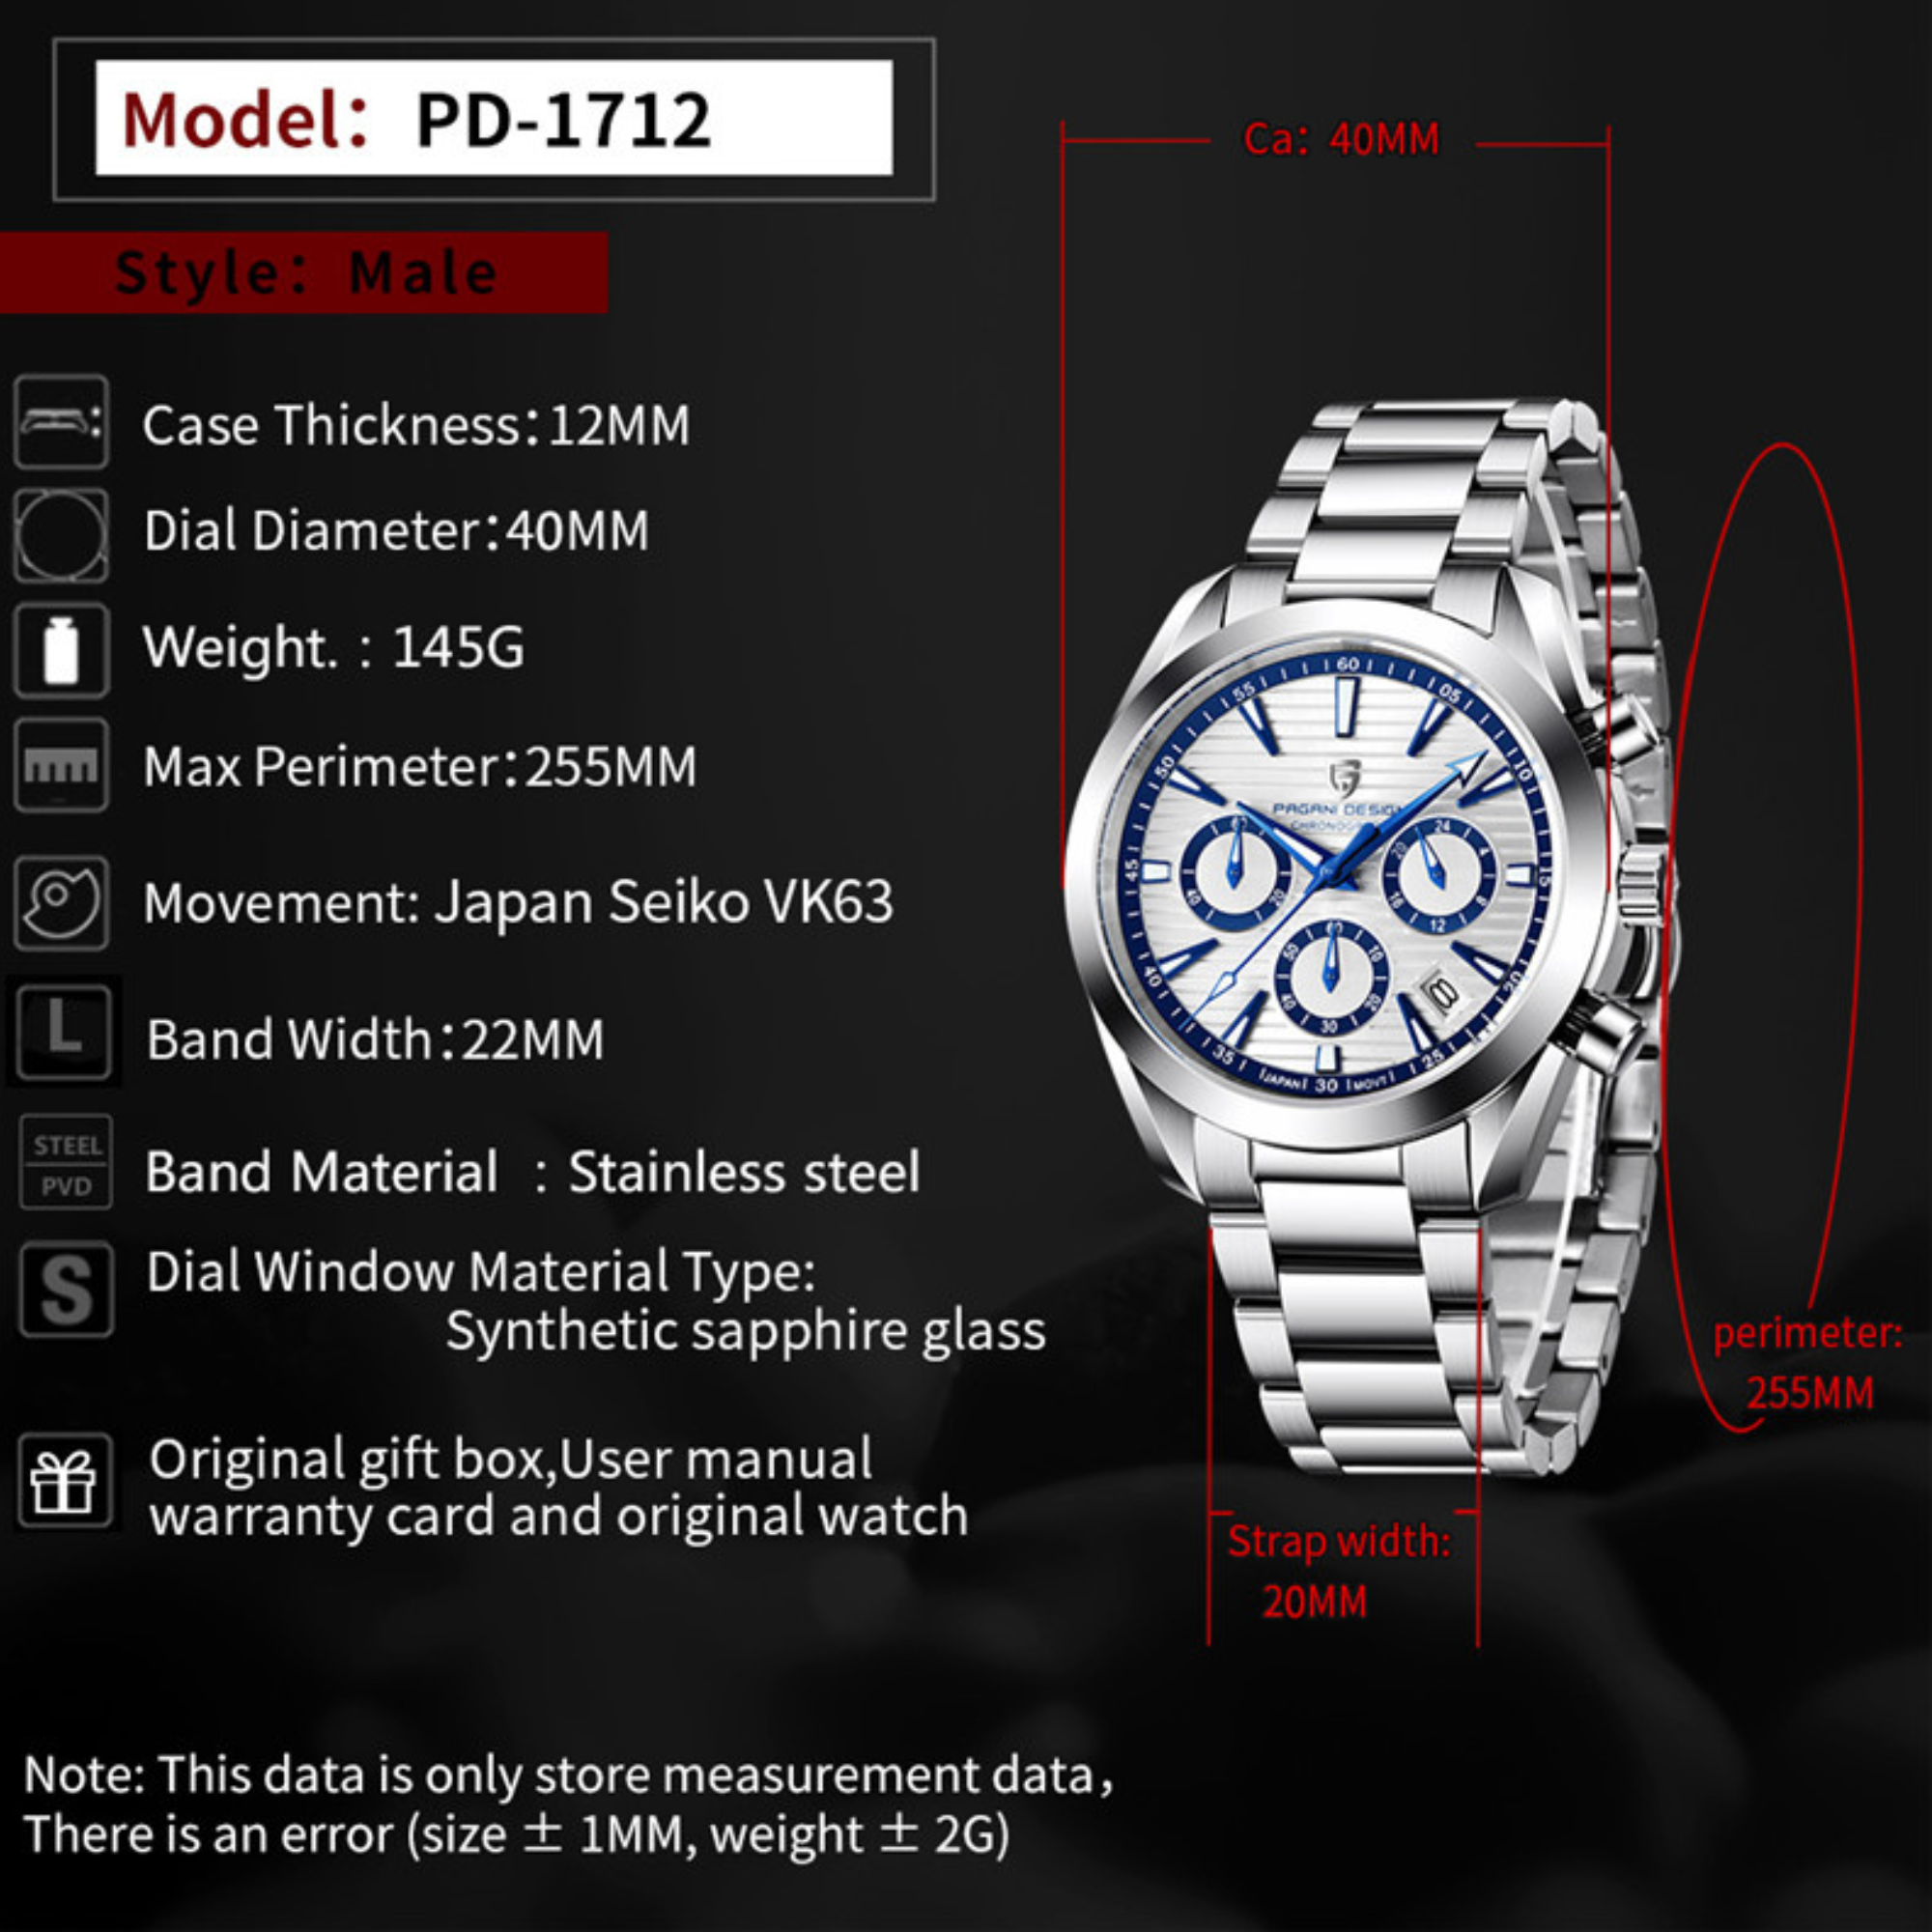 Pagani Design PD-1712 Chronograph Luxury Waterproof Stainless Steel Men's Watch 40MM Watch (Movement Japanese VK63) White Dial